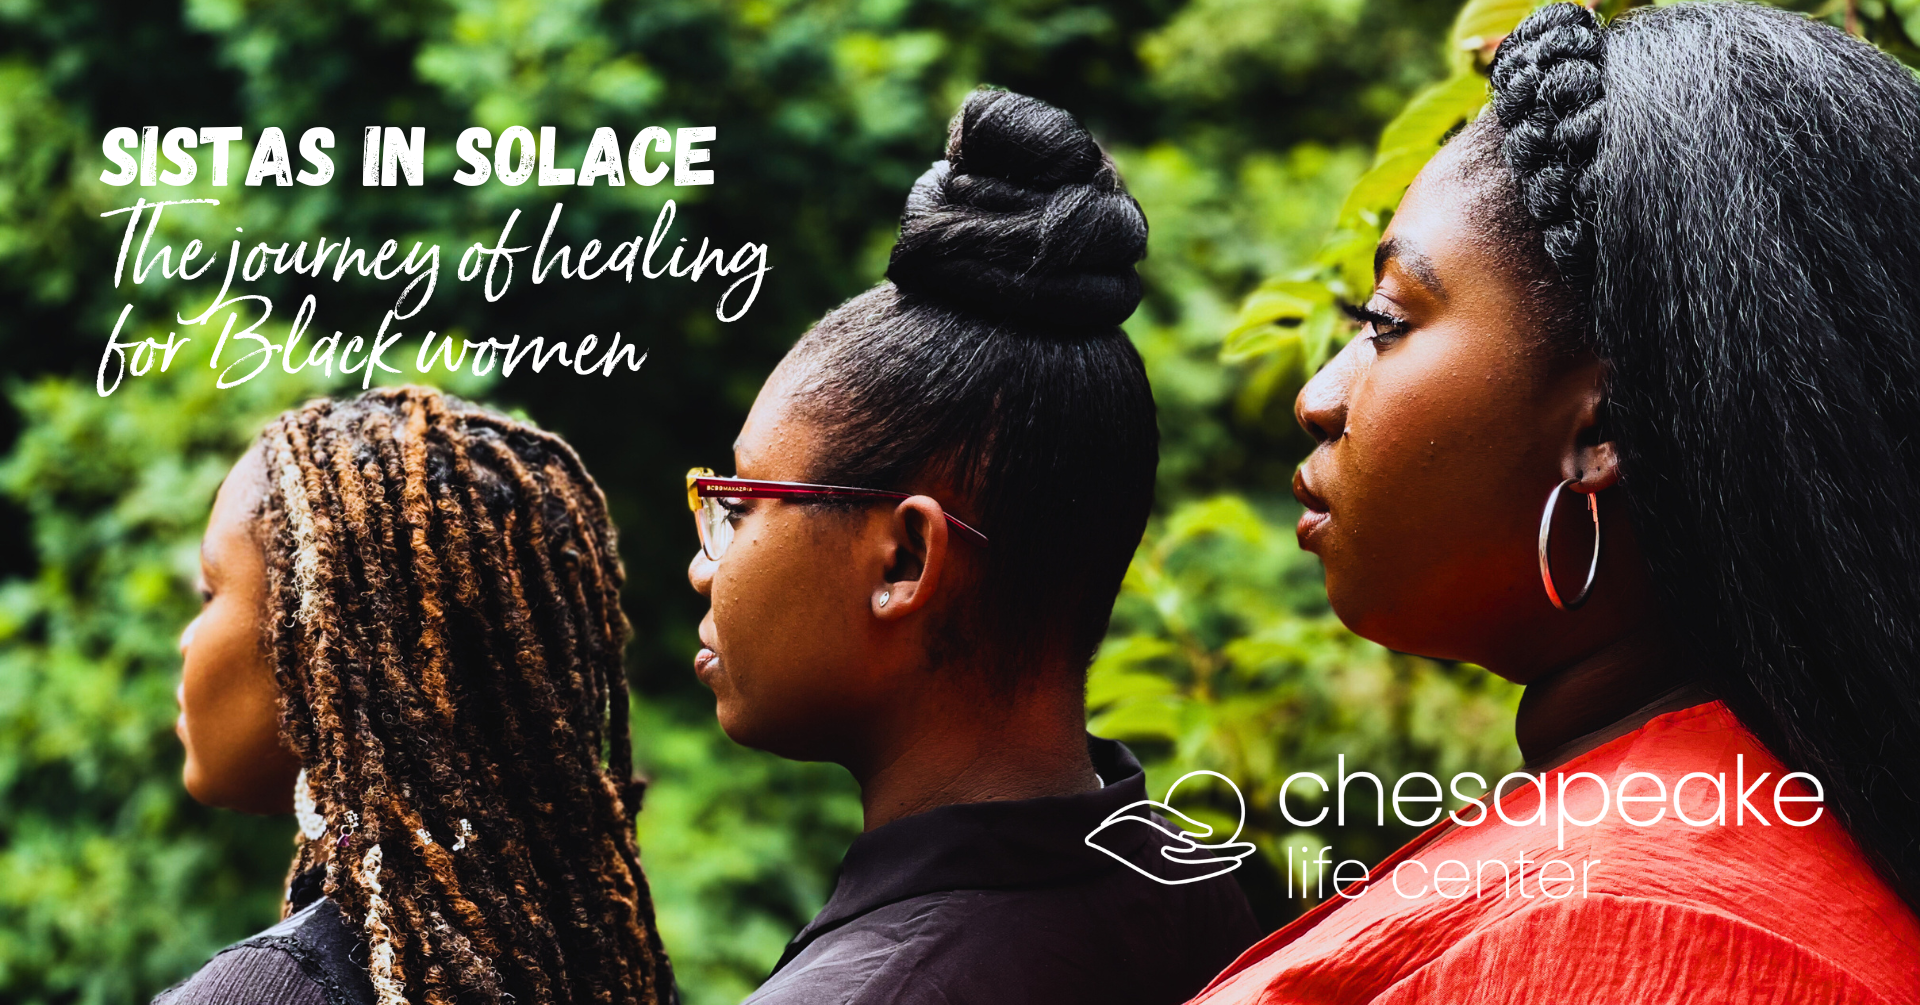 Sistas in Solace: The Journey of Healing for Black Women feature image